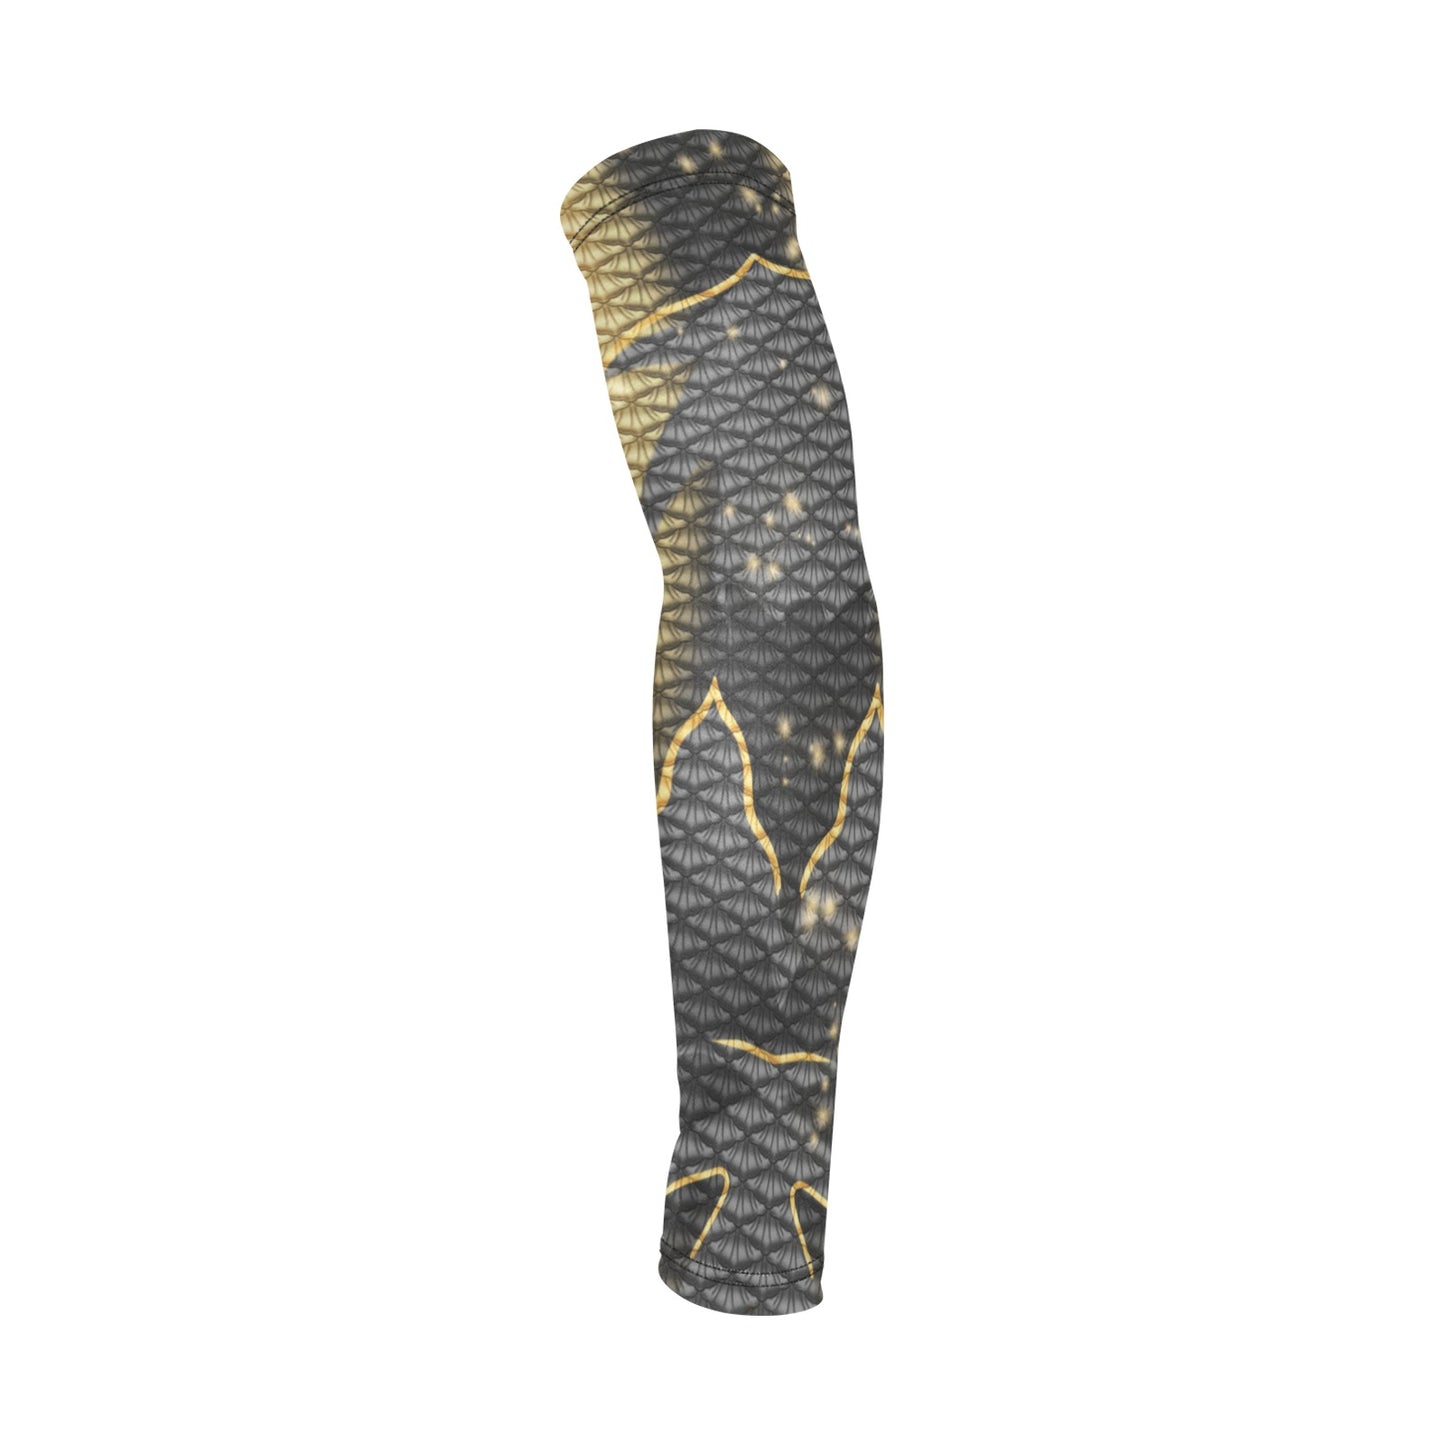 Ascension Arm Sleeves